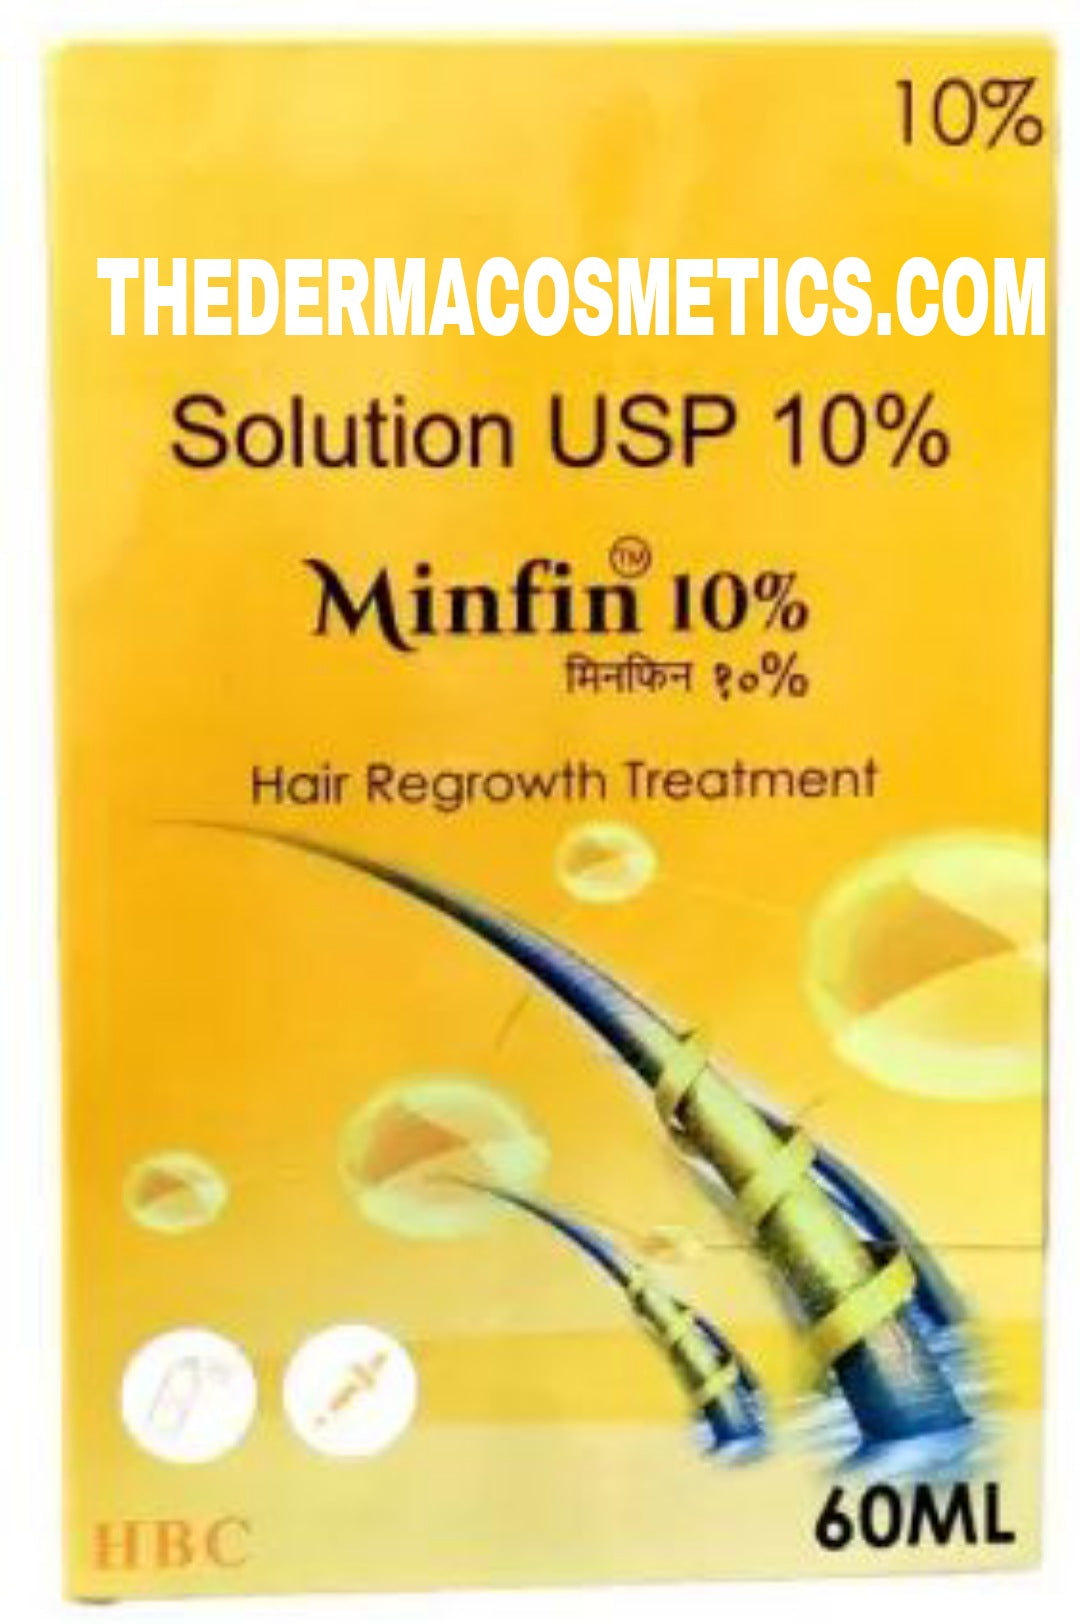 minfin 10 topical solution (60ml) for hair loss and hair regrowth